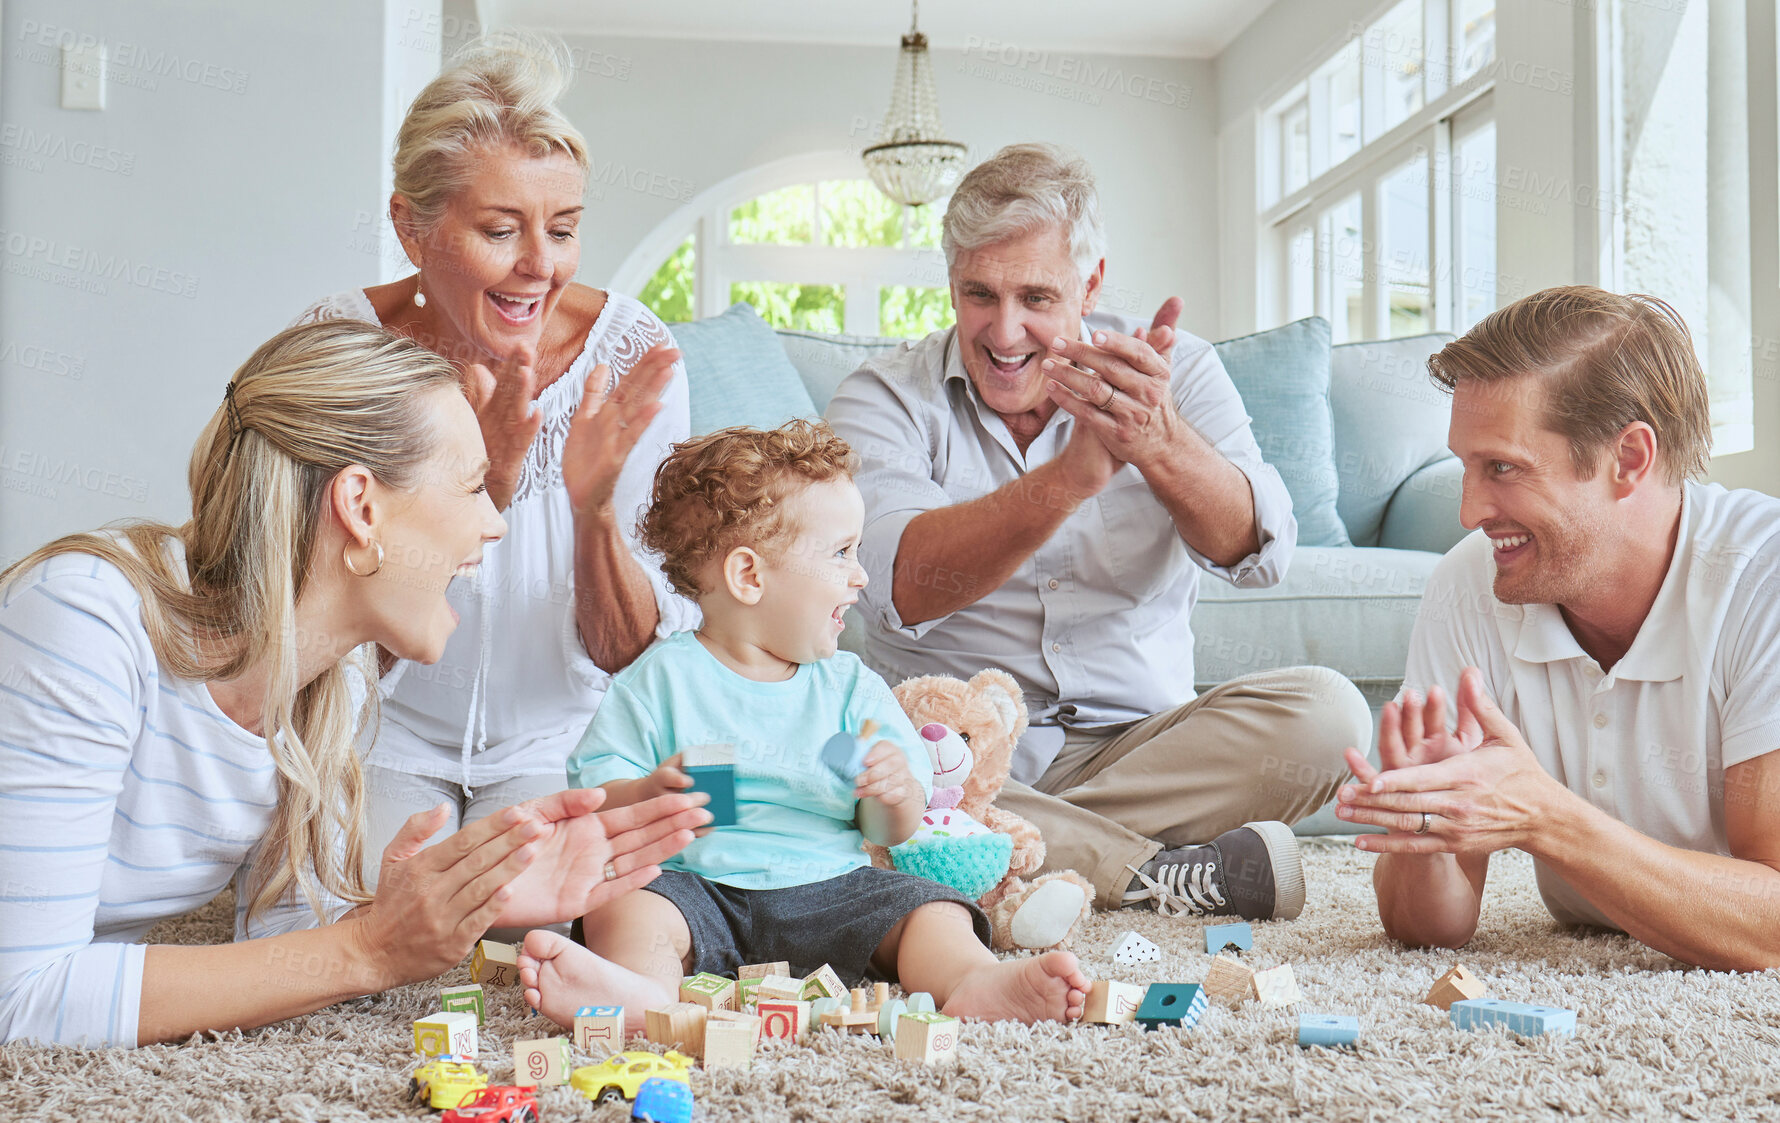 Buy stock photo Family, clapping hands and baby playing with toys while sitting on the living room floor. Love, care and happy people cheering for child development, learning and growth while bonding in the lounge.